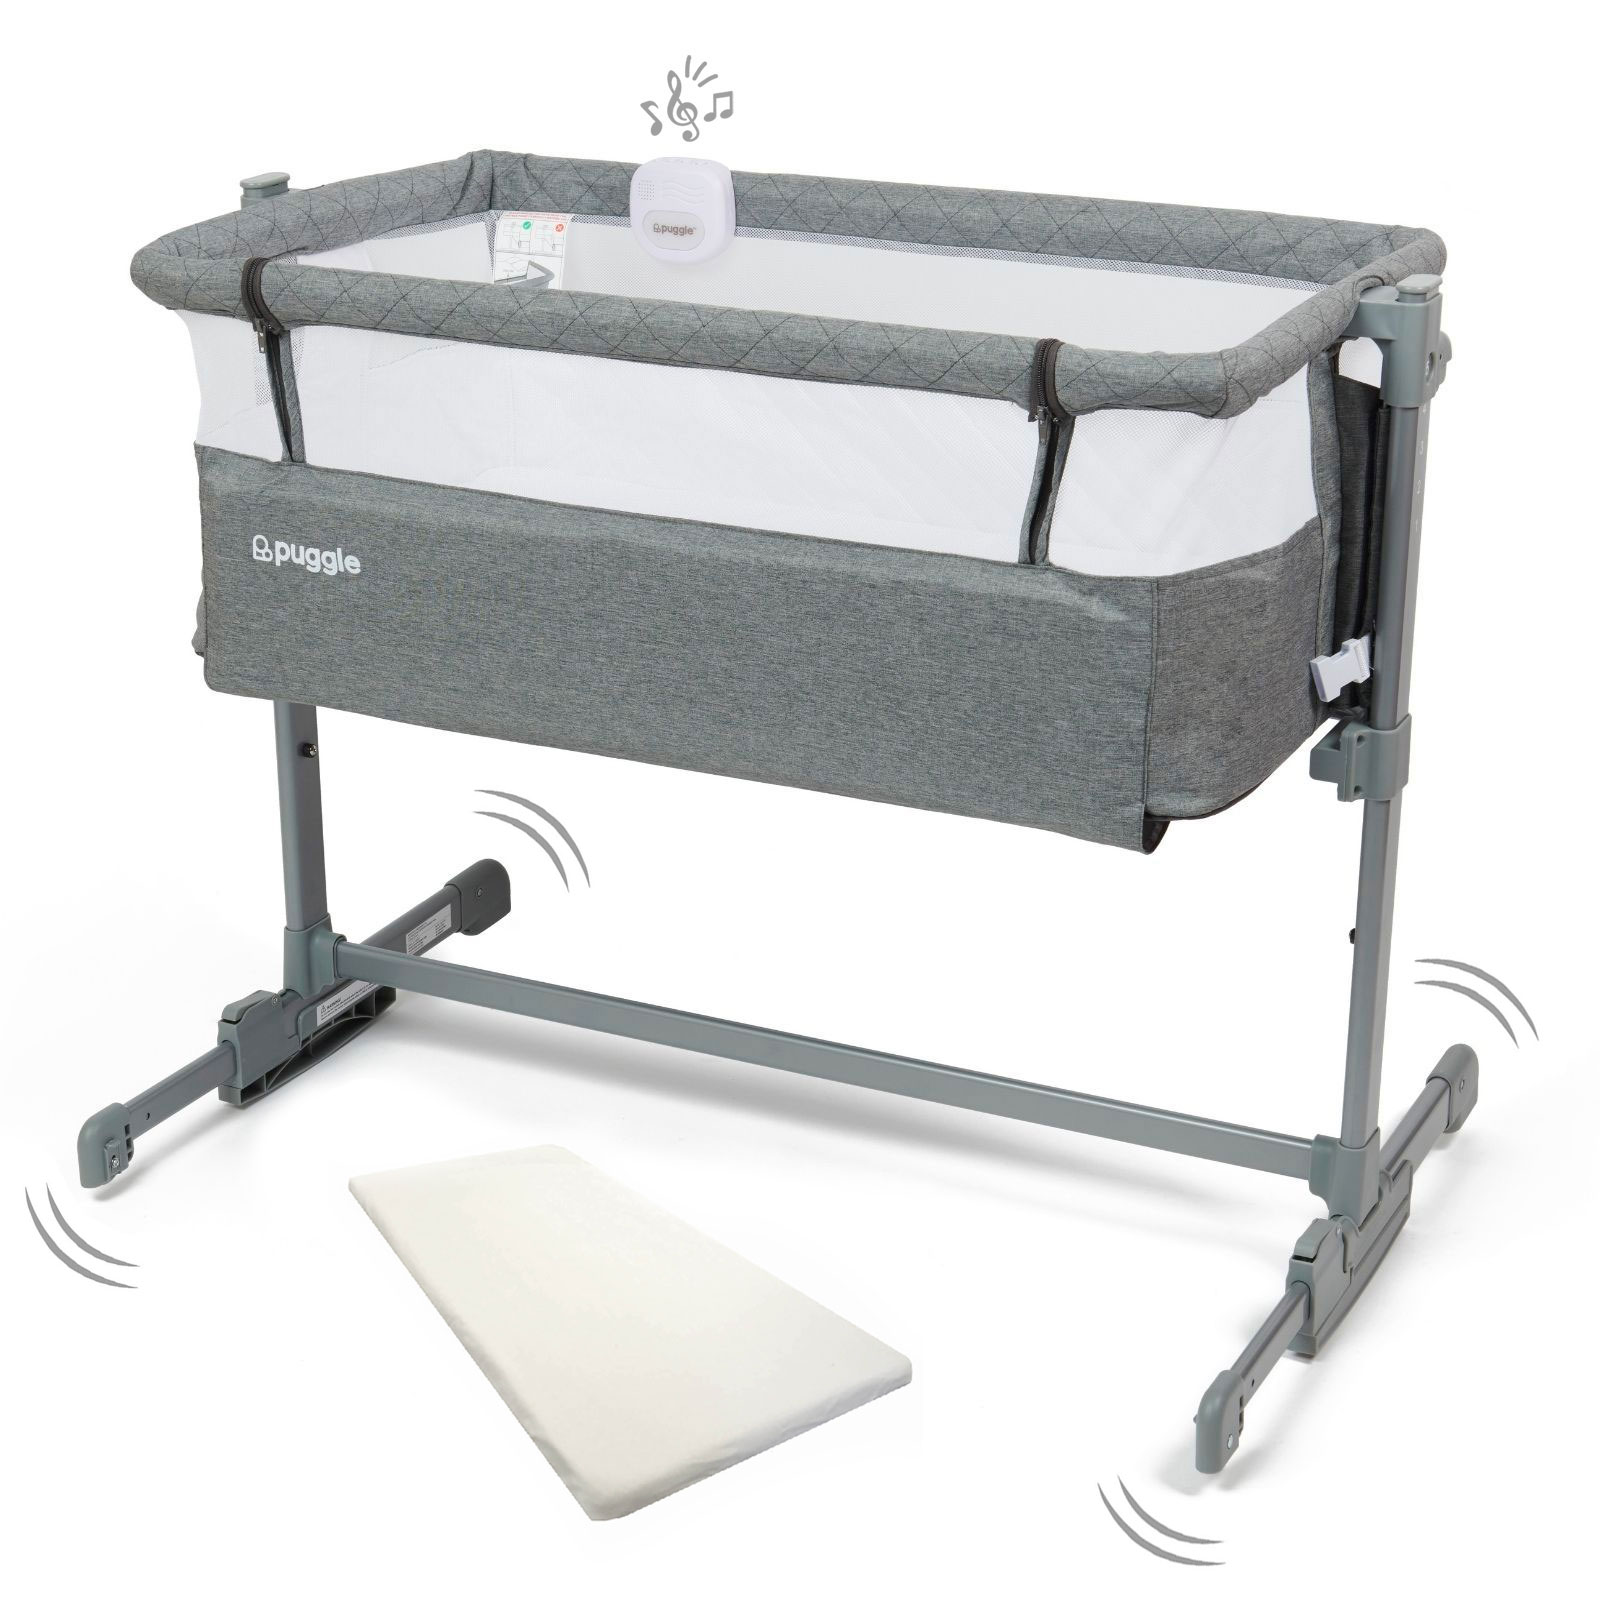 Puggle Sleepy Bedside Crib with Rocking, Lights, Sound & Fitted Sheet - Graphite Grey